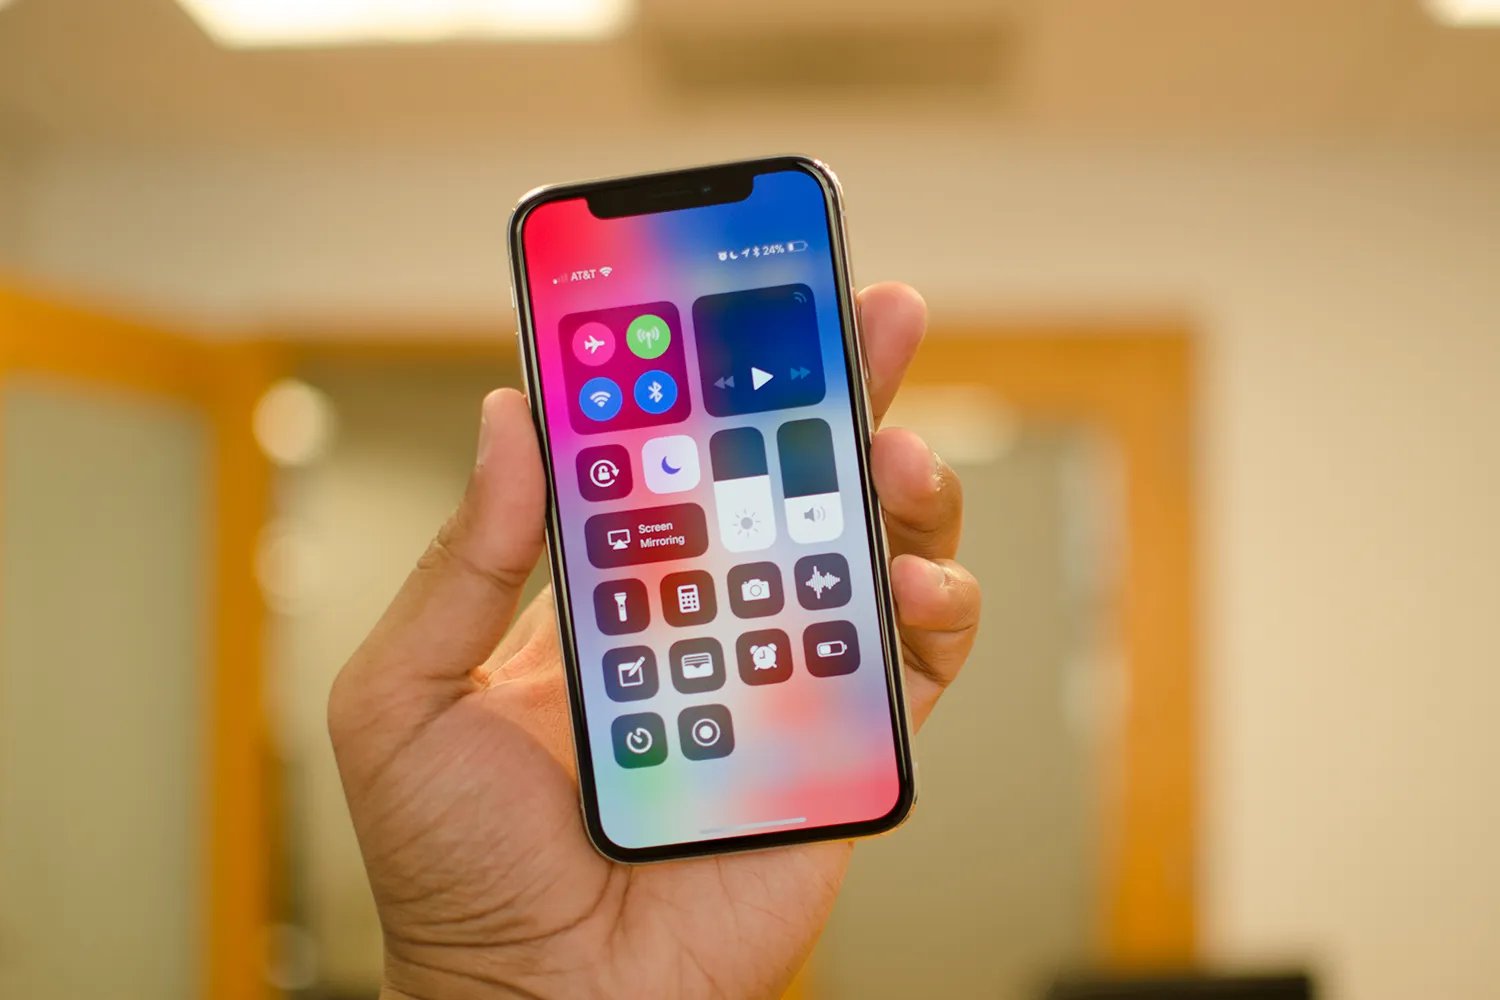 Speaker Locations: Identifying The Speaker Positions On IPhone 11